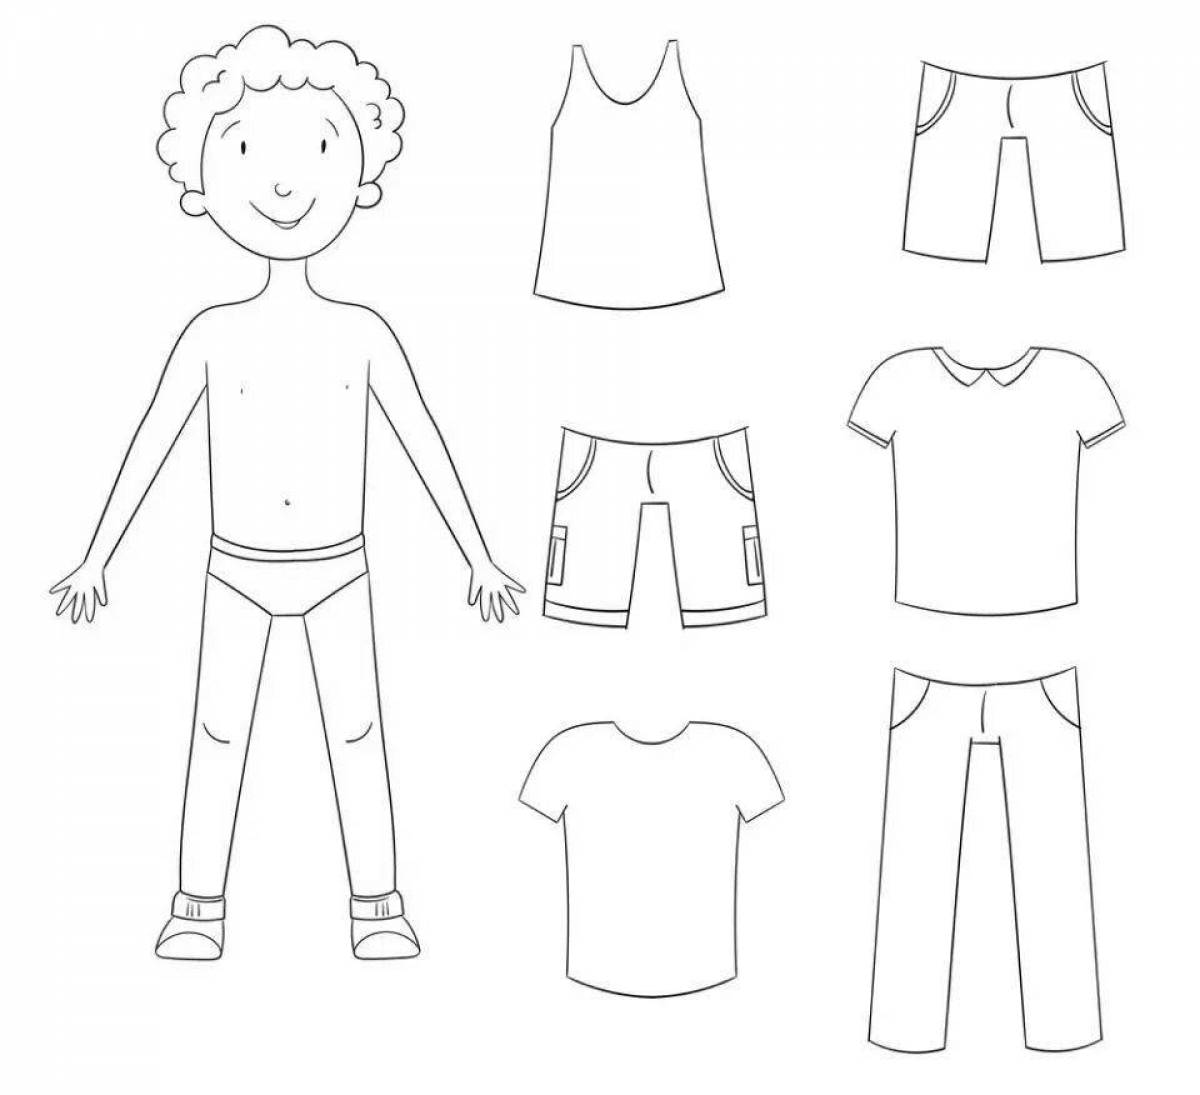 Colorful paper doll boy with clothes to cut out